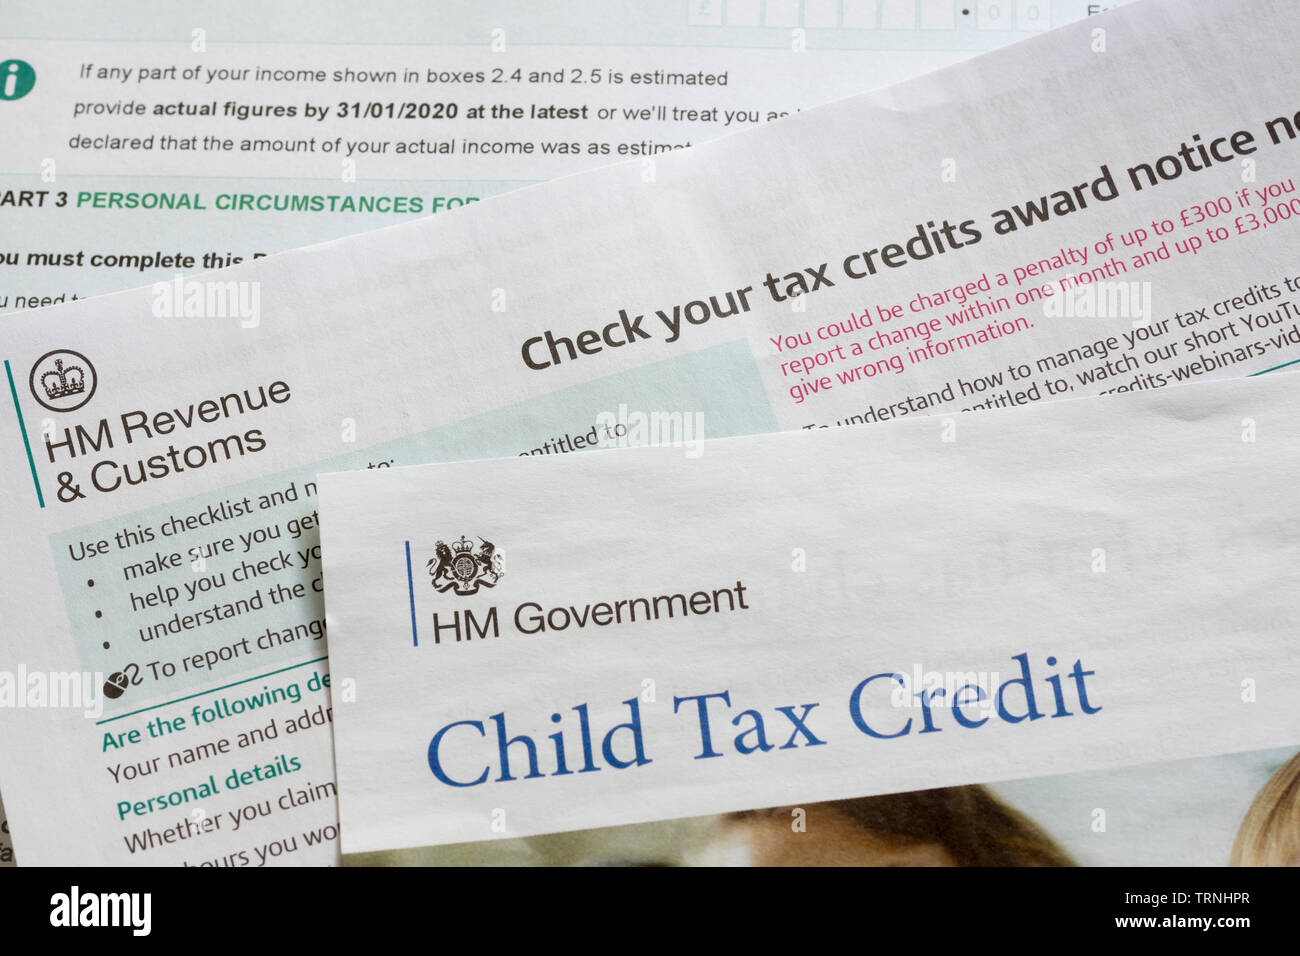 British child tax credit renewal reminder for government social security benefits for people in low paid employment with children Stock Photo